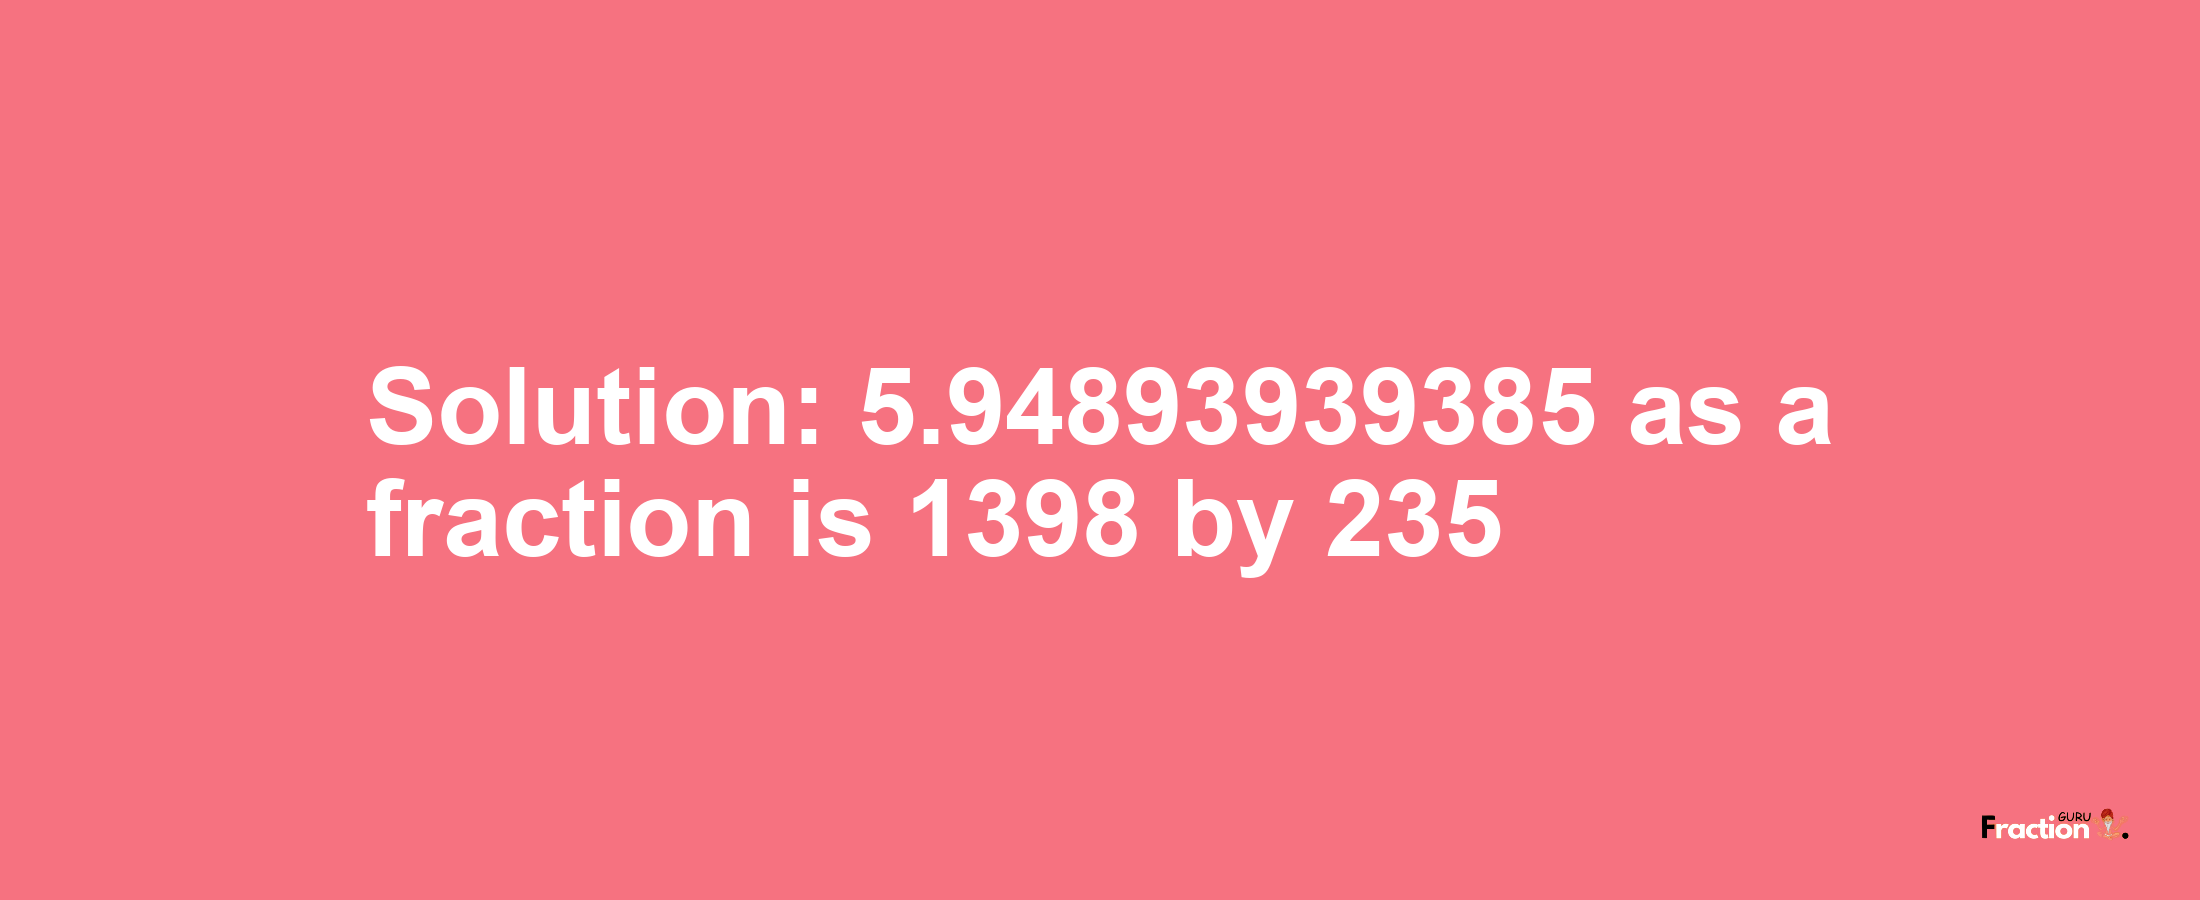 Solution:5.94893939385 as a fraction is 1398/235